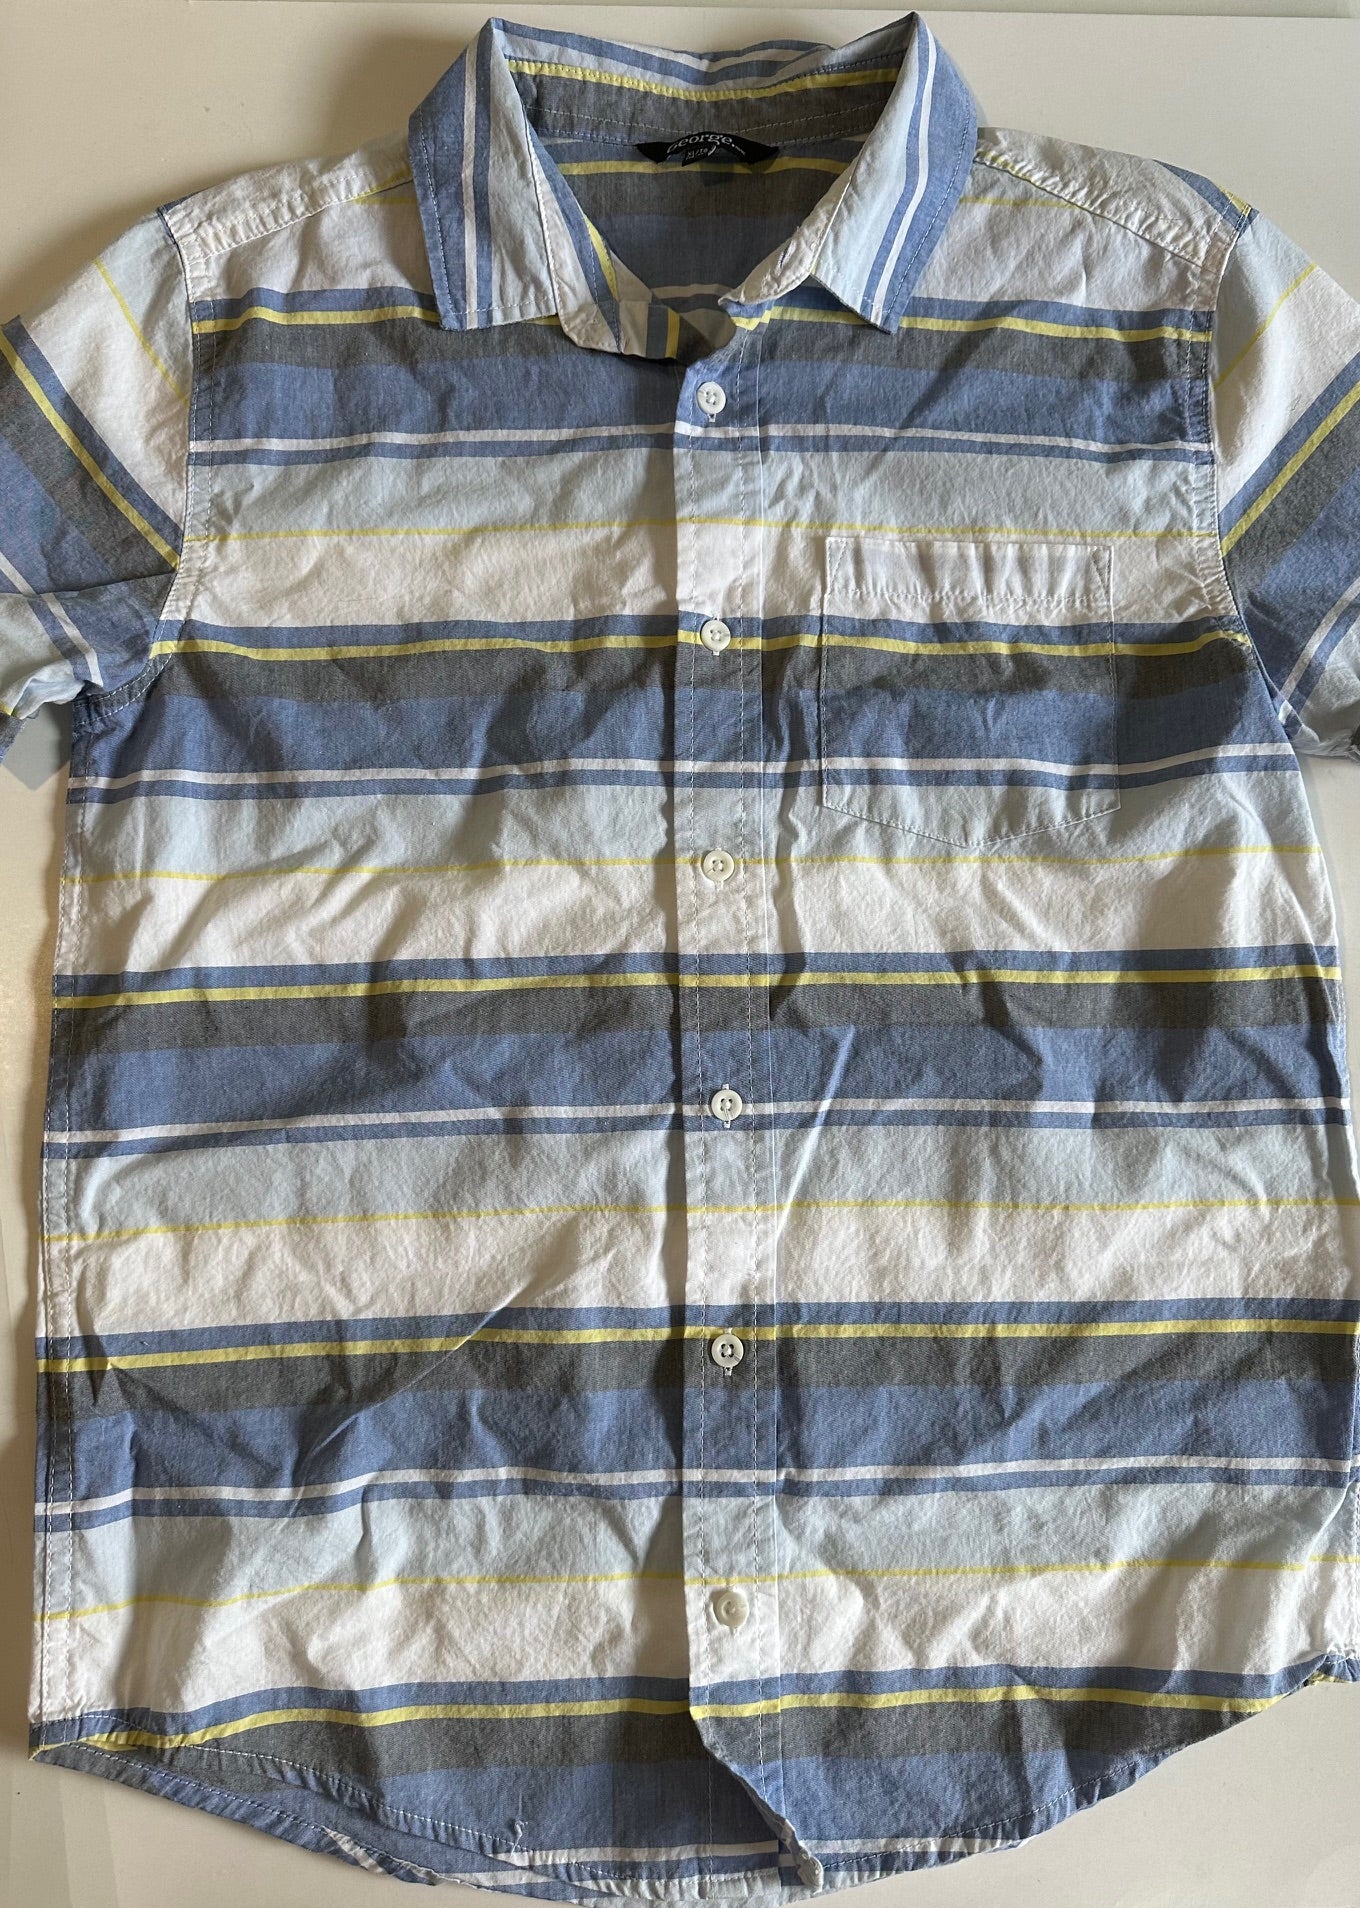 George, Blue and White Striped Button-Up T-Shirt - Size XL (14-16)